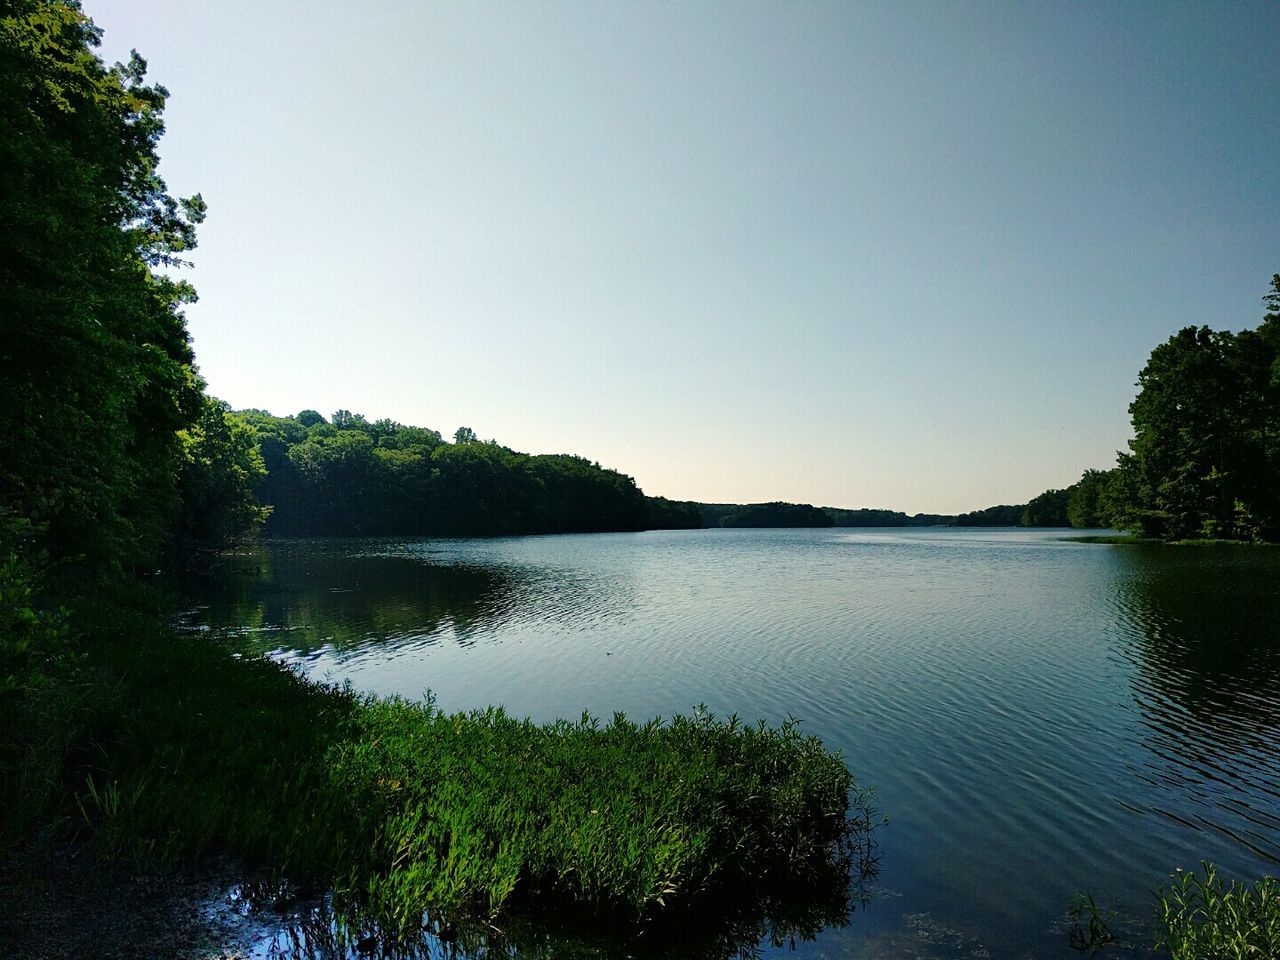 SCENIC VIEW OF CALM LAKE AGAINST CLEAR SKY